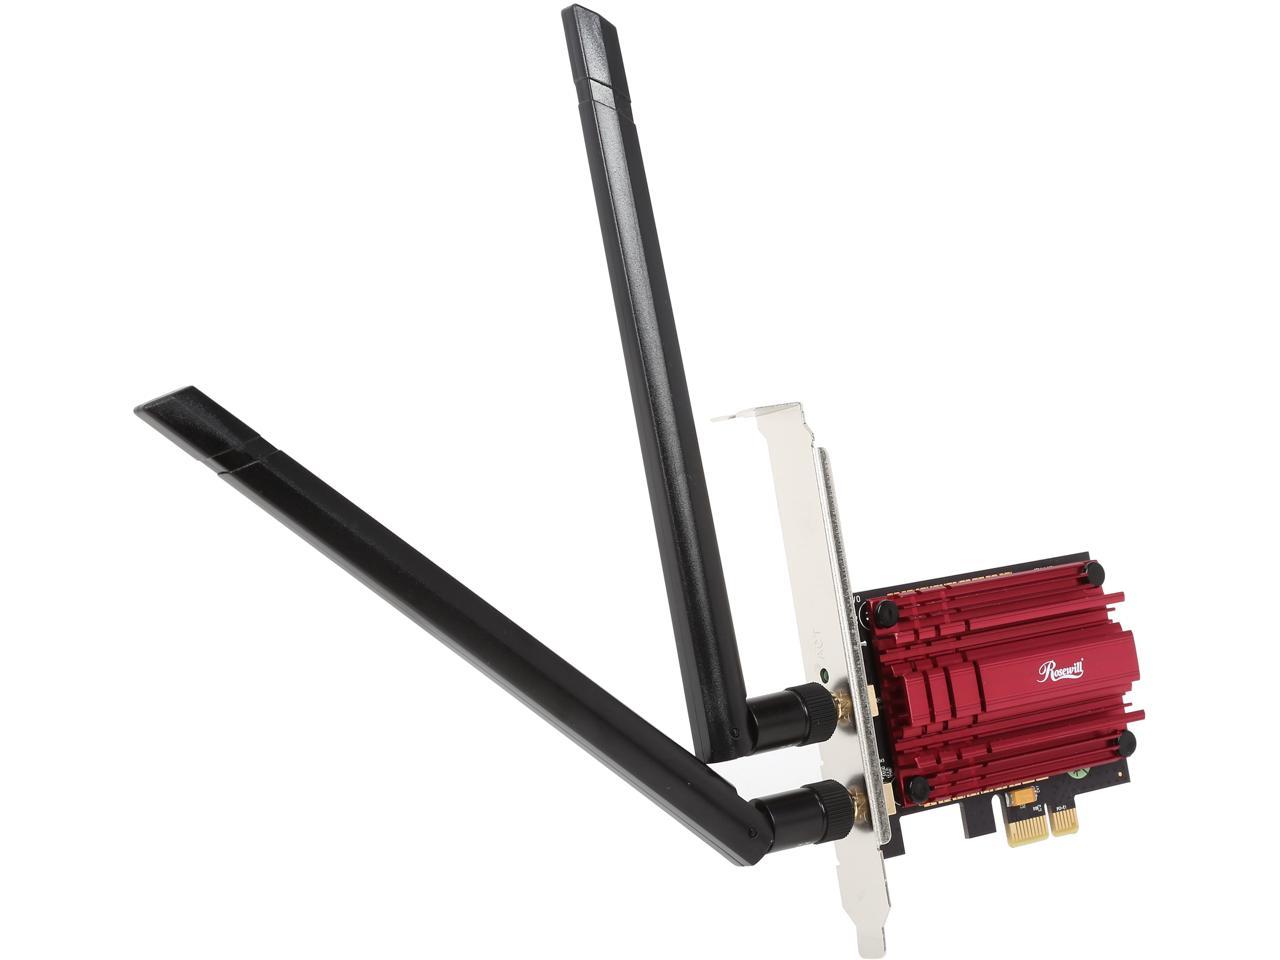 Rosewill RNX-AC1200PCE - Dual Band Wireless AC1200 Adapter, IEEE 802